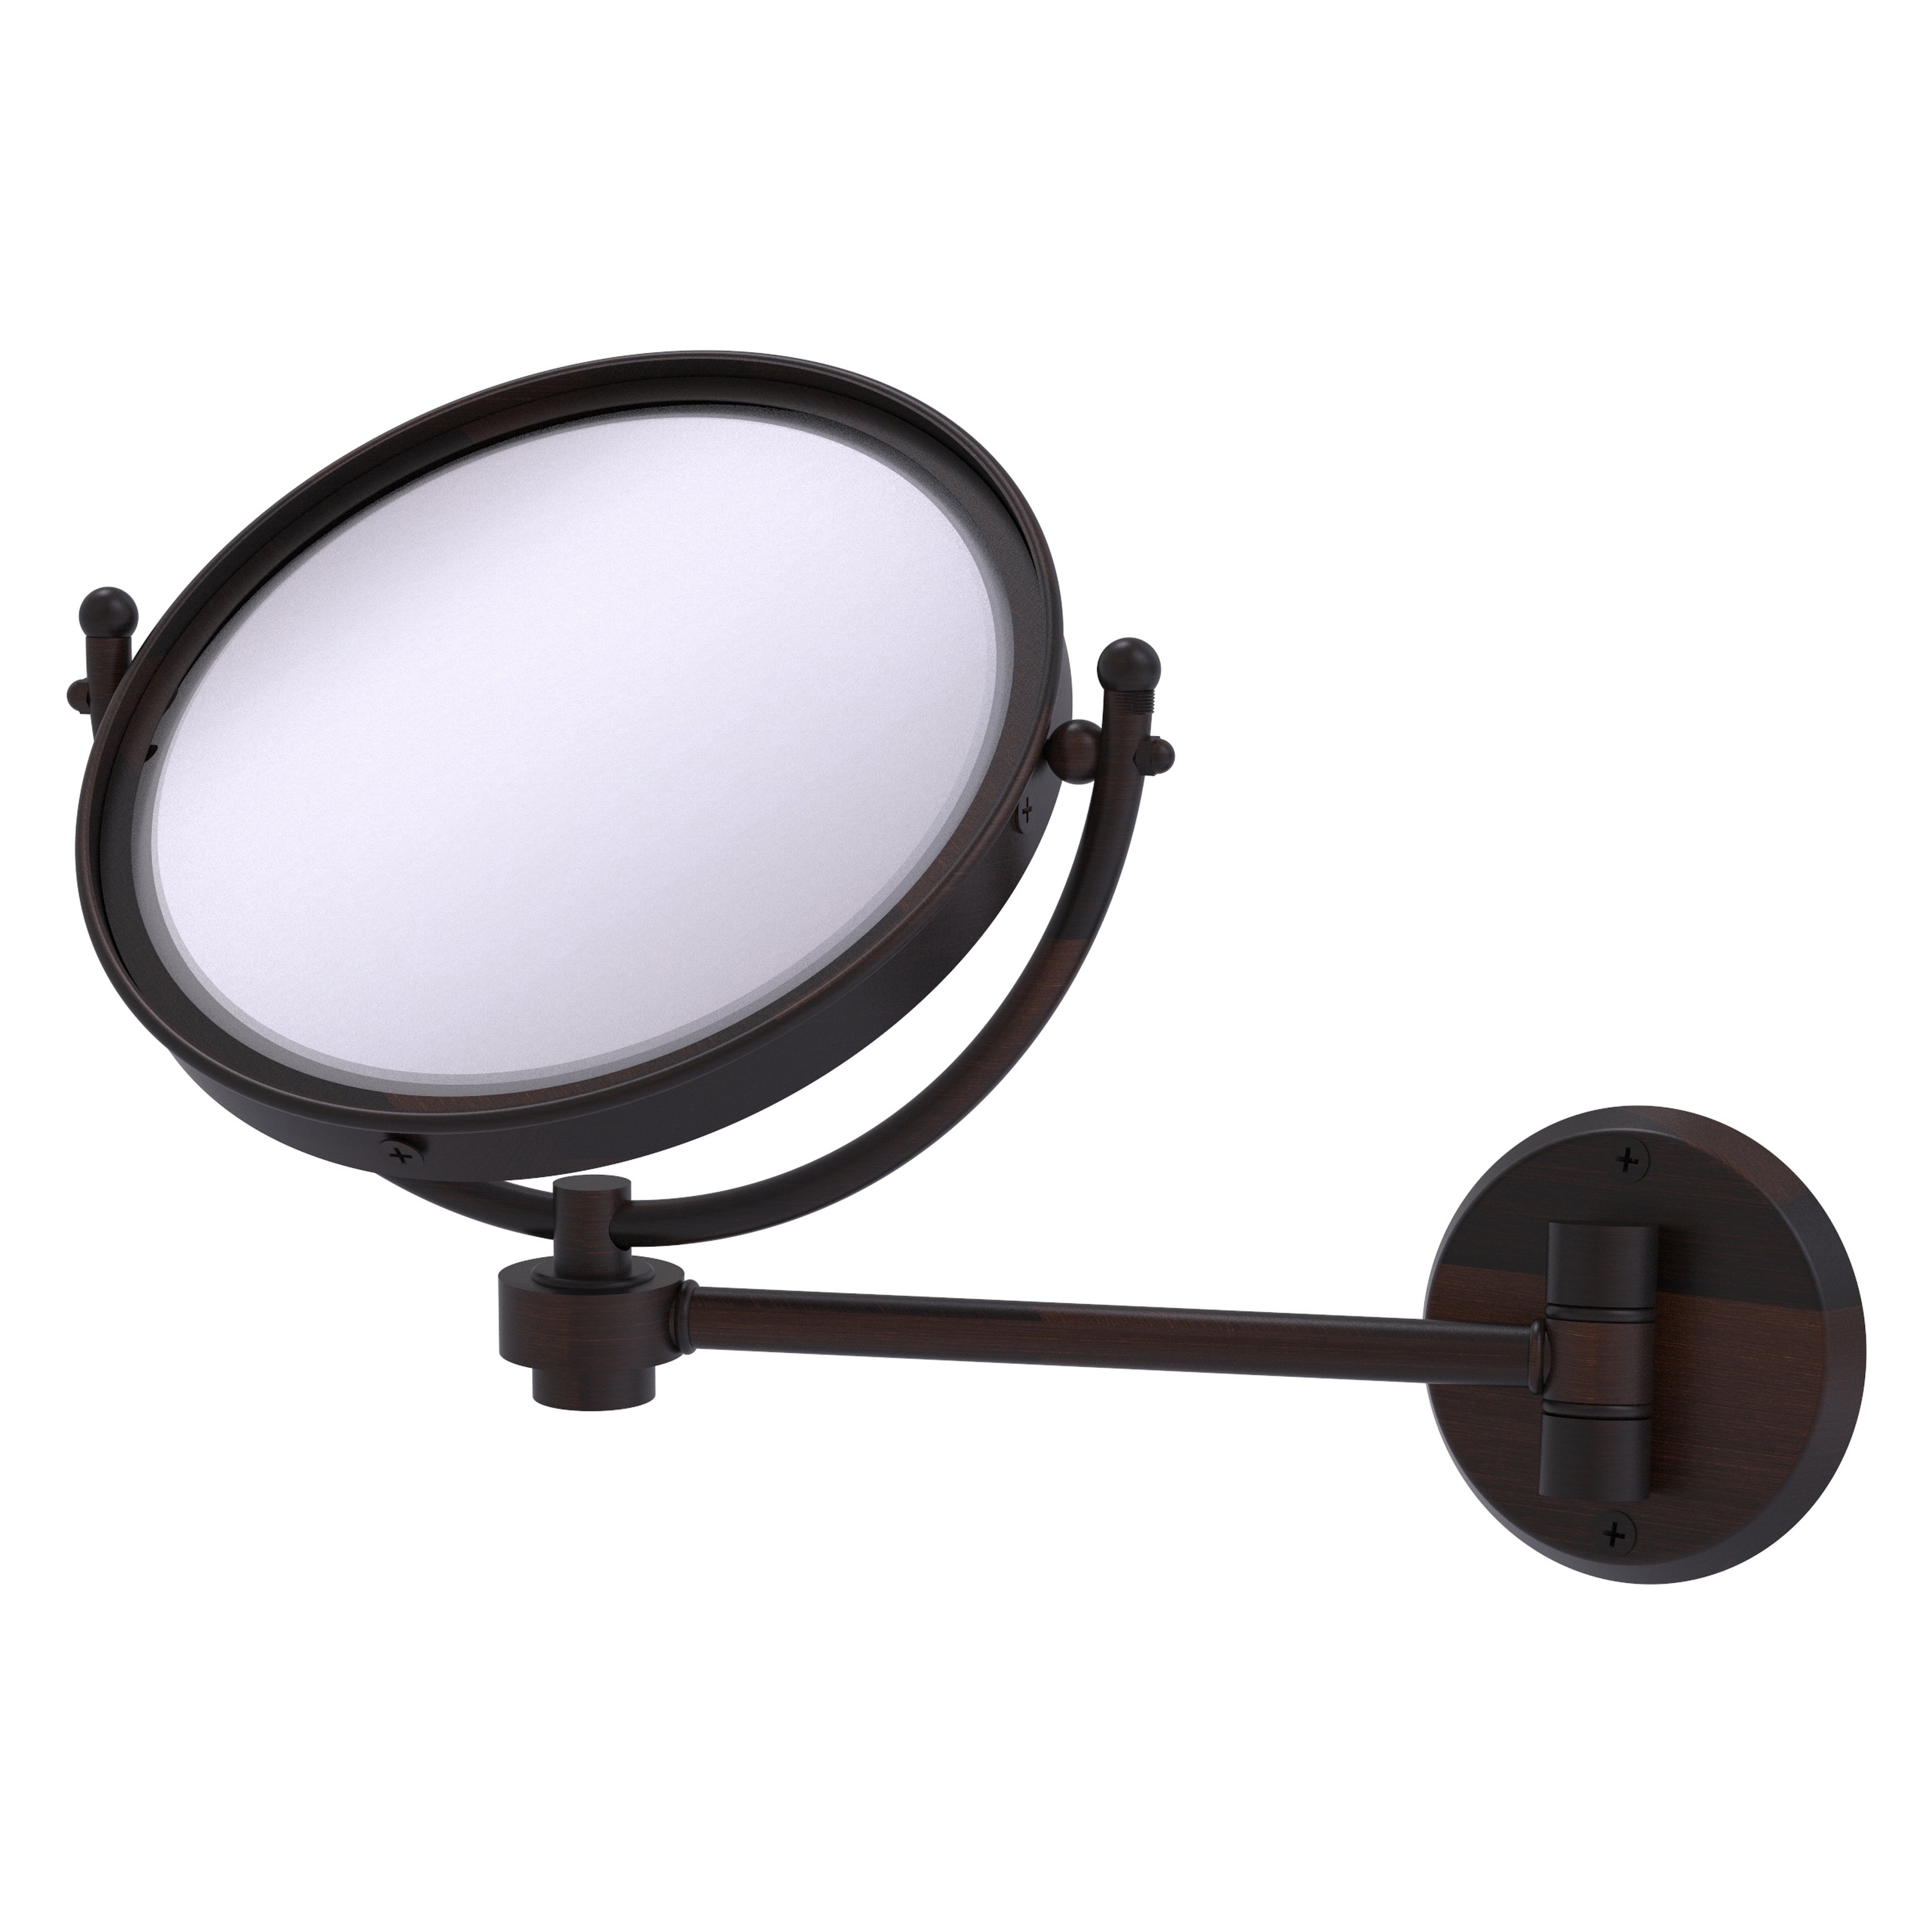 8-in x 10-in Distressed White Double-sided 3X Magnifying Wall-mounted Vanity Mirror | - Allied Brass WM-5/3X-VB